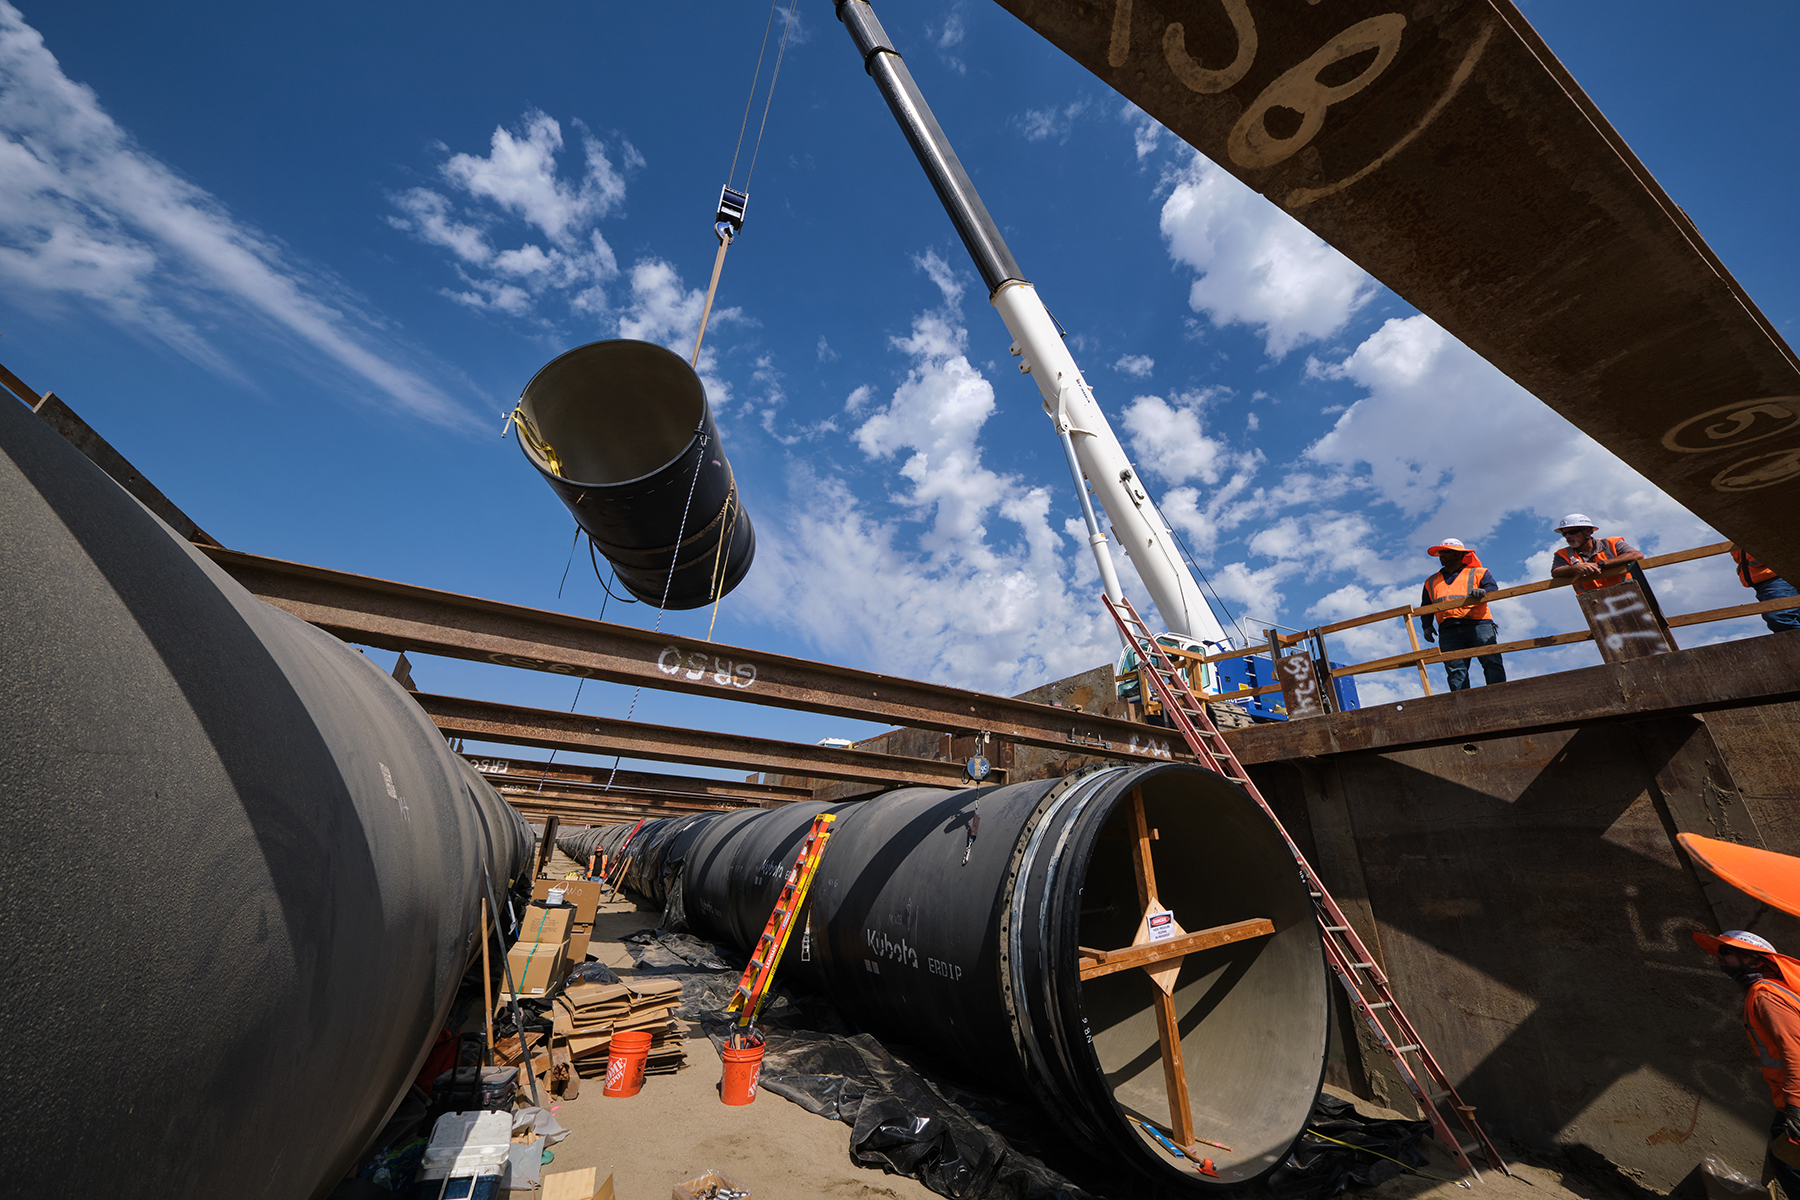 Earthquake-resistant ductile iron pipe sections vary in length from roughly 6.5 ft to nearly 13.3 ft. (Image courtesy of the Metropolitan Water District of Southern California)